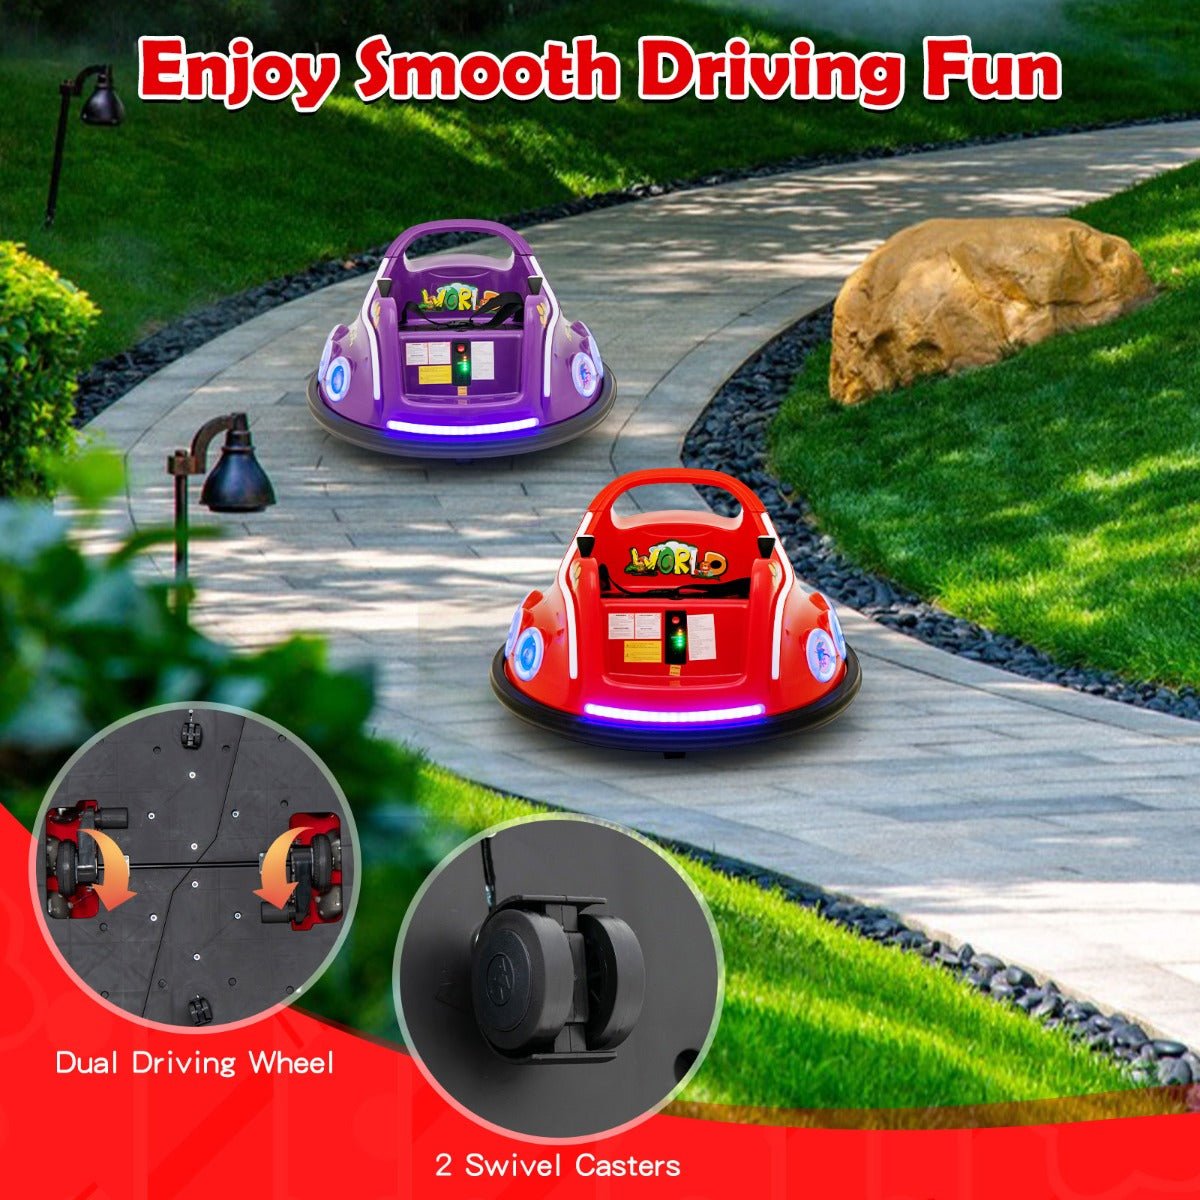 Experience Joy with the Red Ride-On Bumper Car